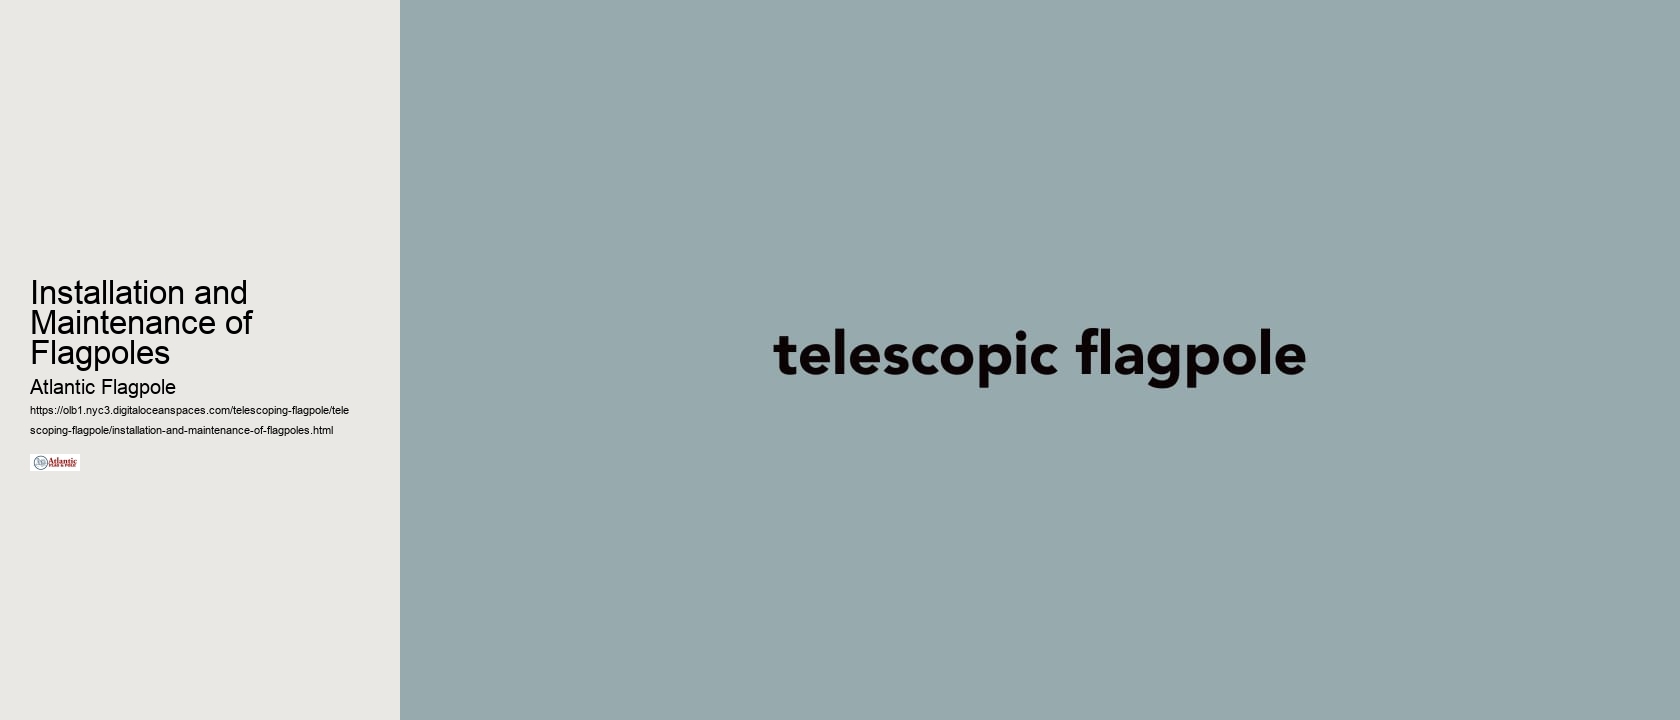 Installation and Maintenance of Flagpoles